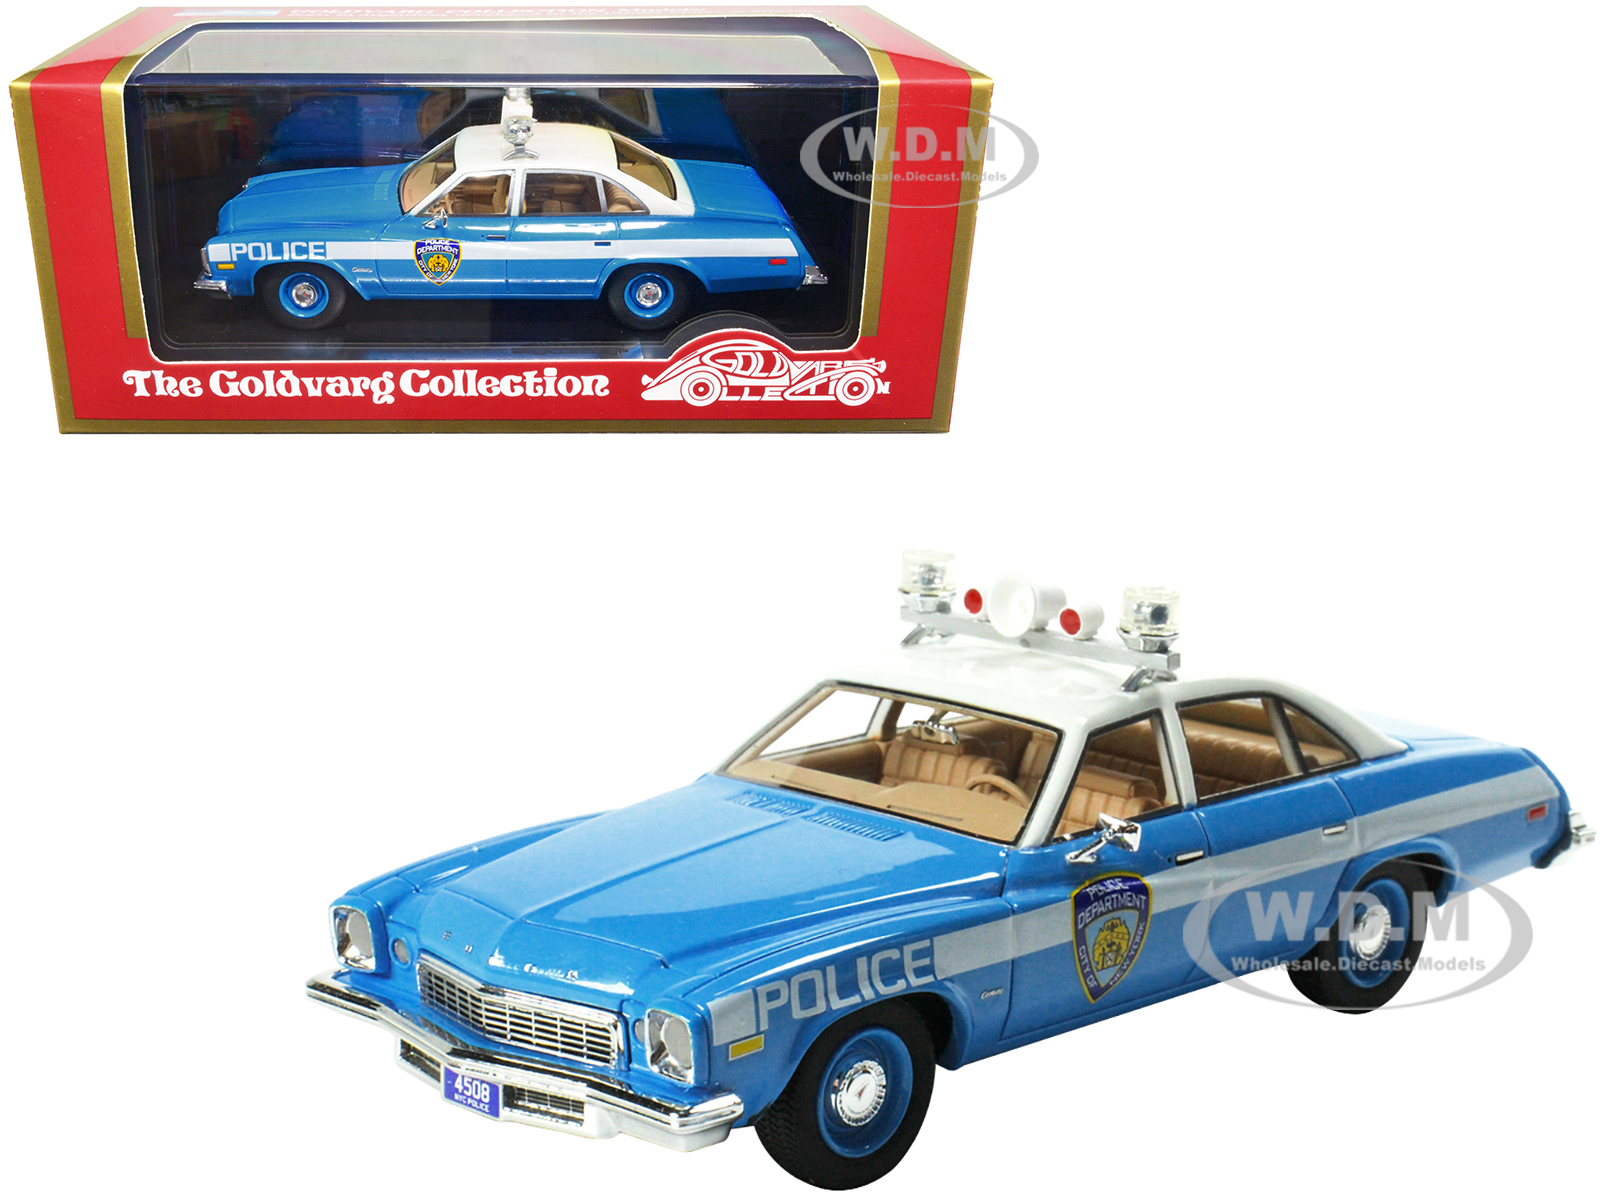 1974 Buick Century Police Blue and White NYPD (New York City Police Department) Limited Edition to 333 pieces Worldwide 1/43 Model Car by Goldvarg Co